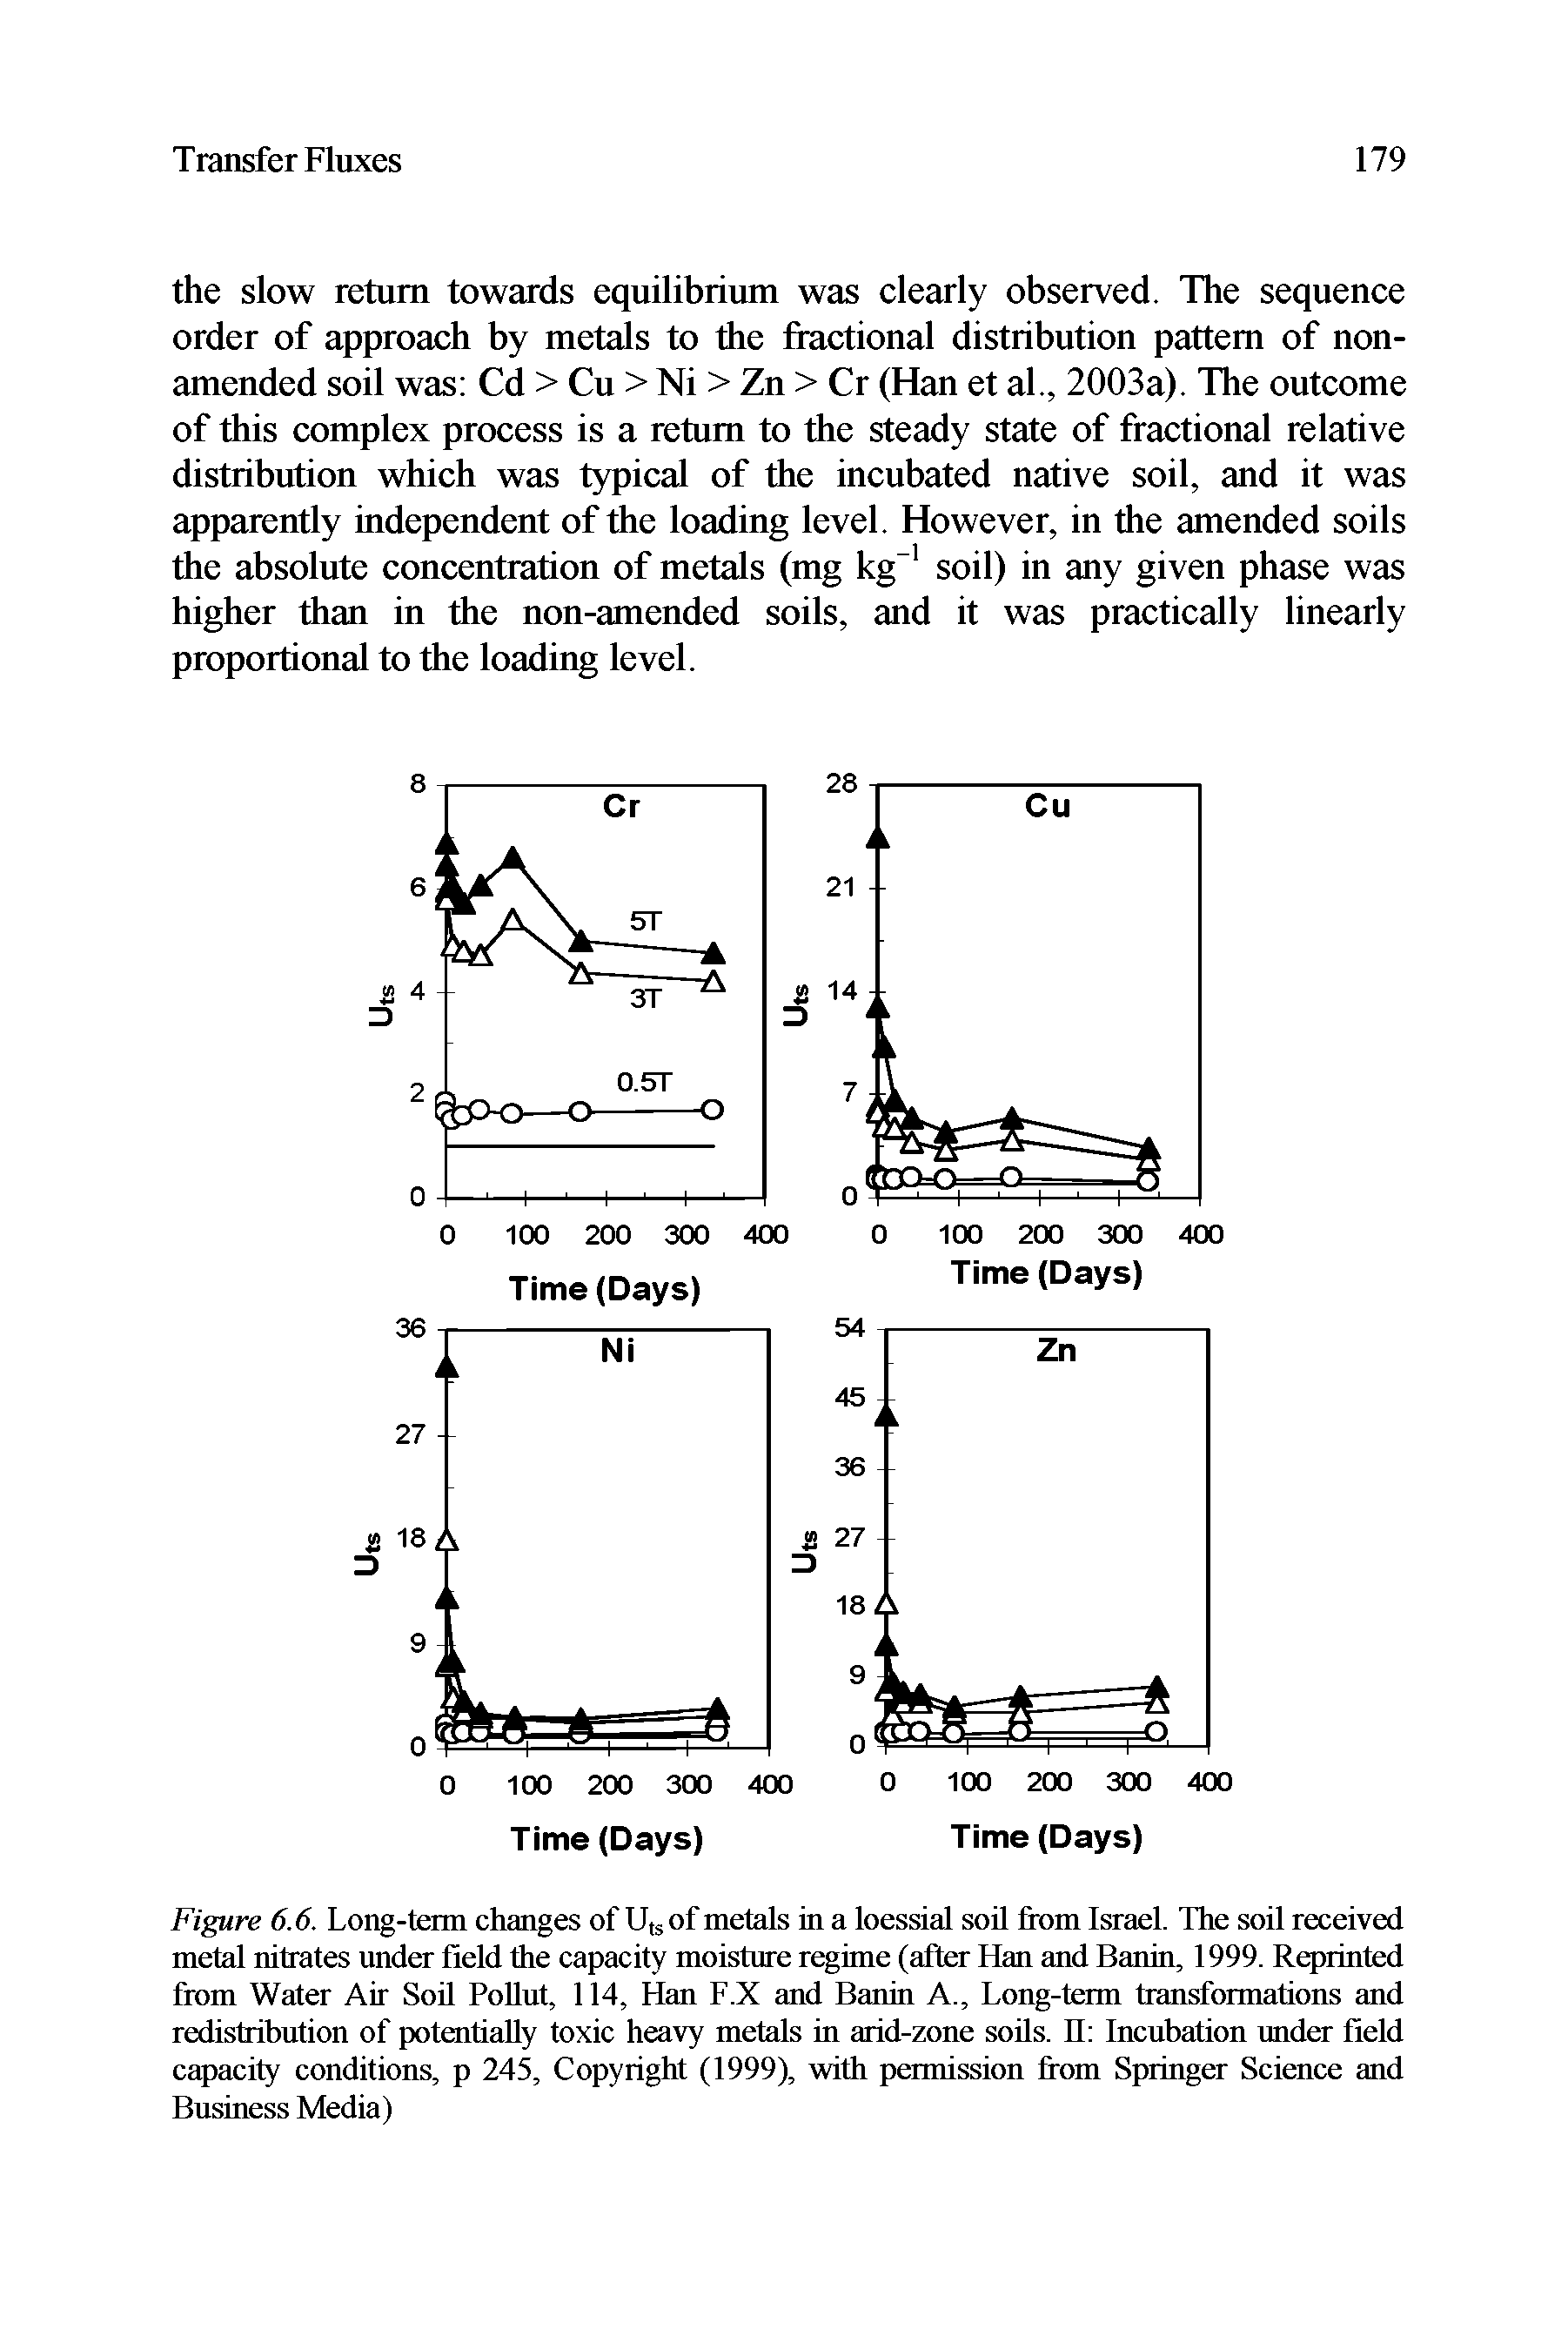 Figure 6.6. Long-term changes of Uts of metals in a loessial soil from Israel. The soil received metal nitrates under field the capacity moisture regime (after Han and Banin, 1999. Reprinted from Water Air Soil Pollut, 114, Han F.X and Banin A., Long-term transformations and redistribution of potentially toxic heavy metals in arid-zone soils. II Incubation under field capacity conditions, p 245, Copyright (1999), with permission from Springer Science and Business Media)...